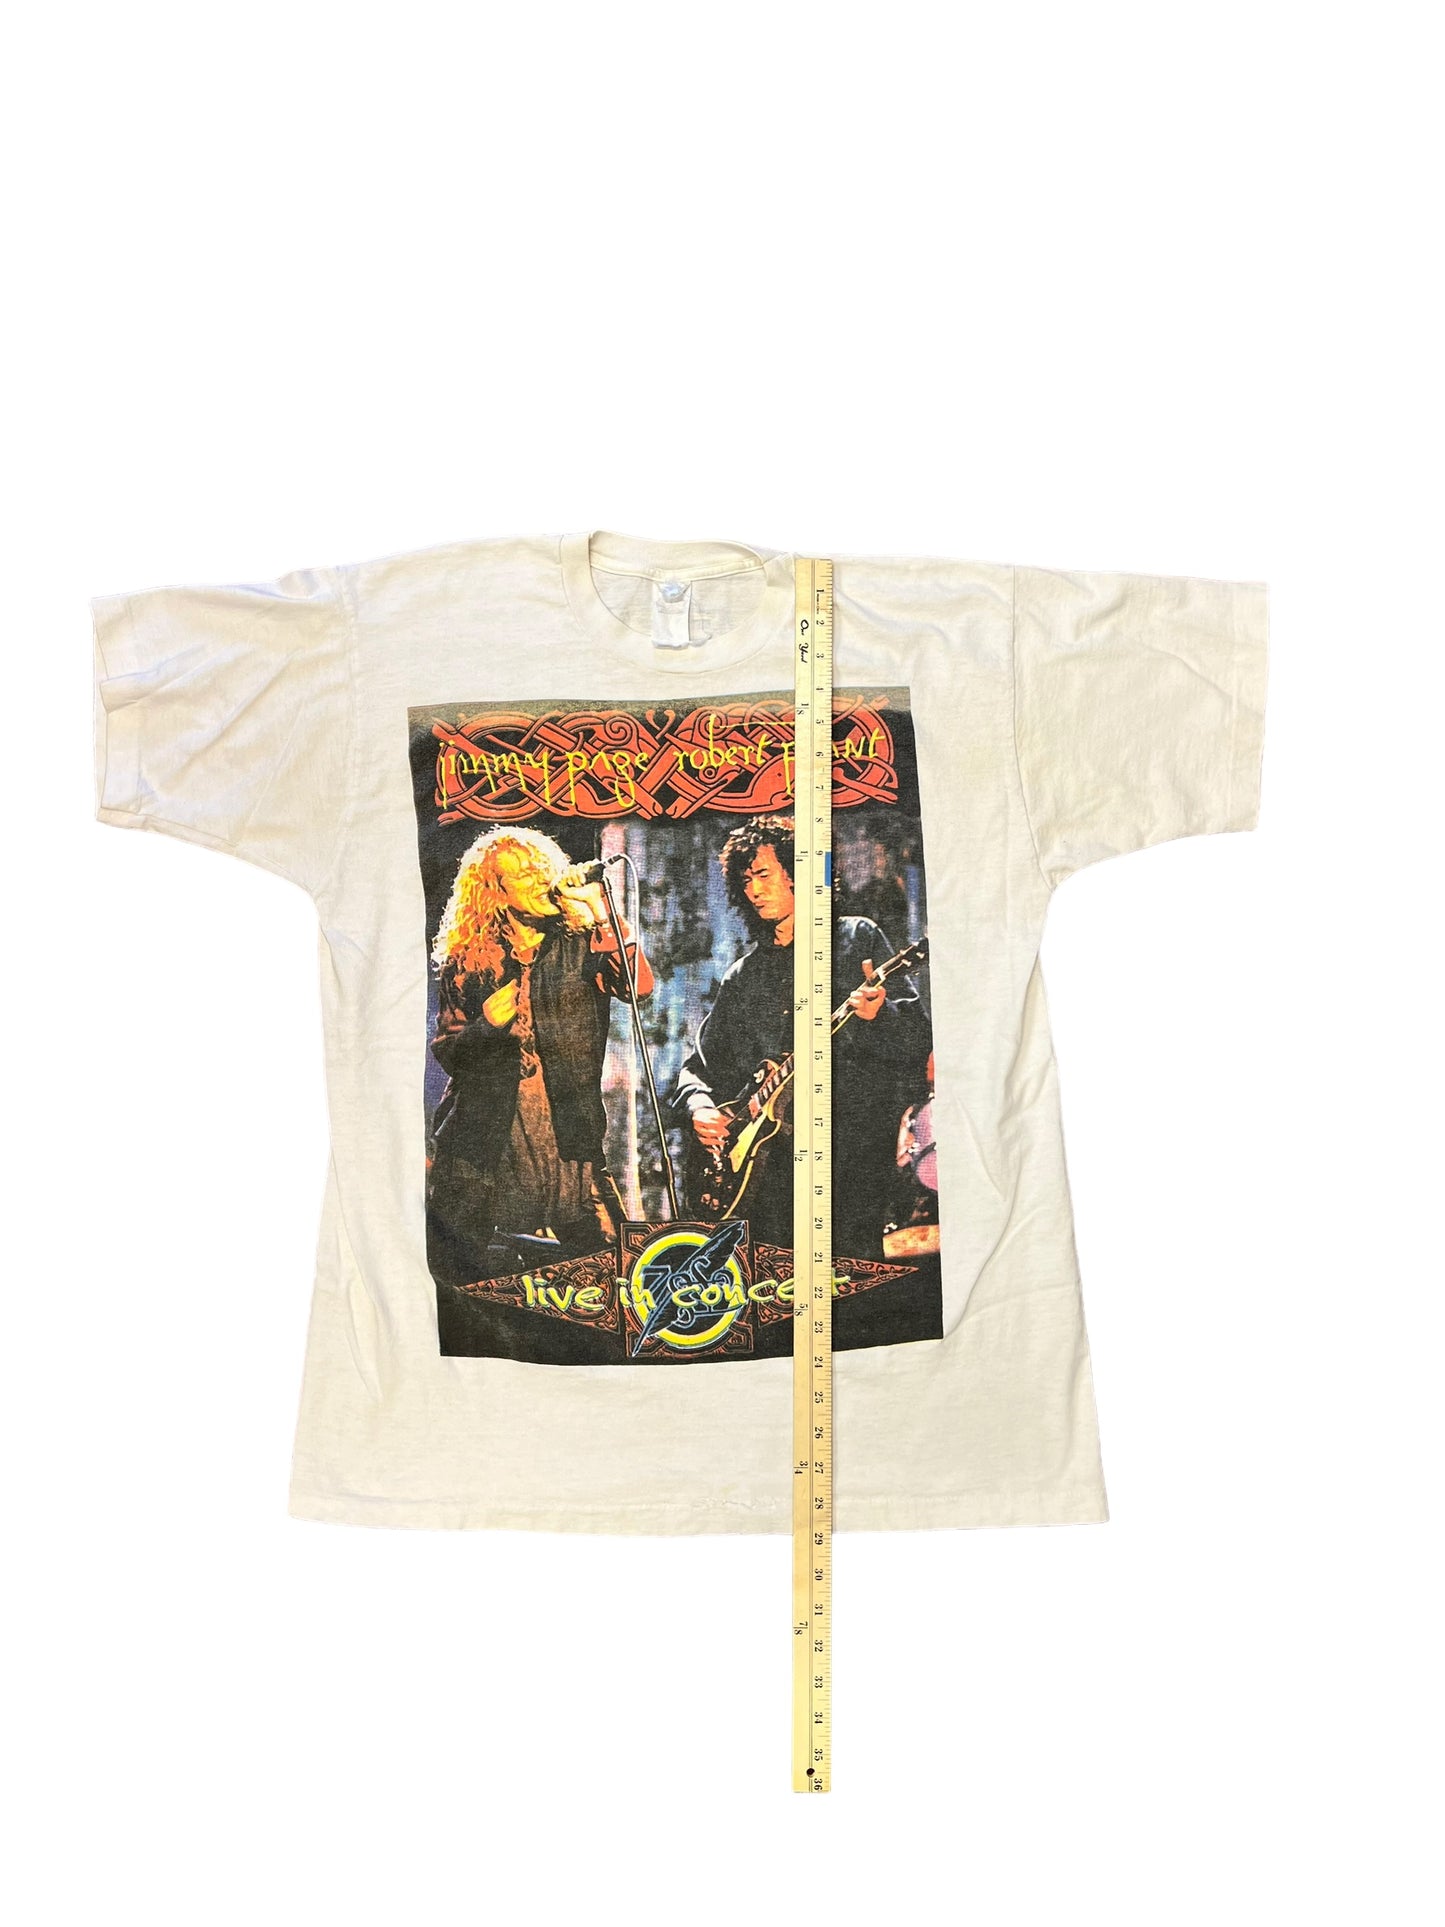 Vintage Jimmy Paige and Robert Plant Parking Lot Bootleg Tee - XL